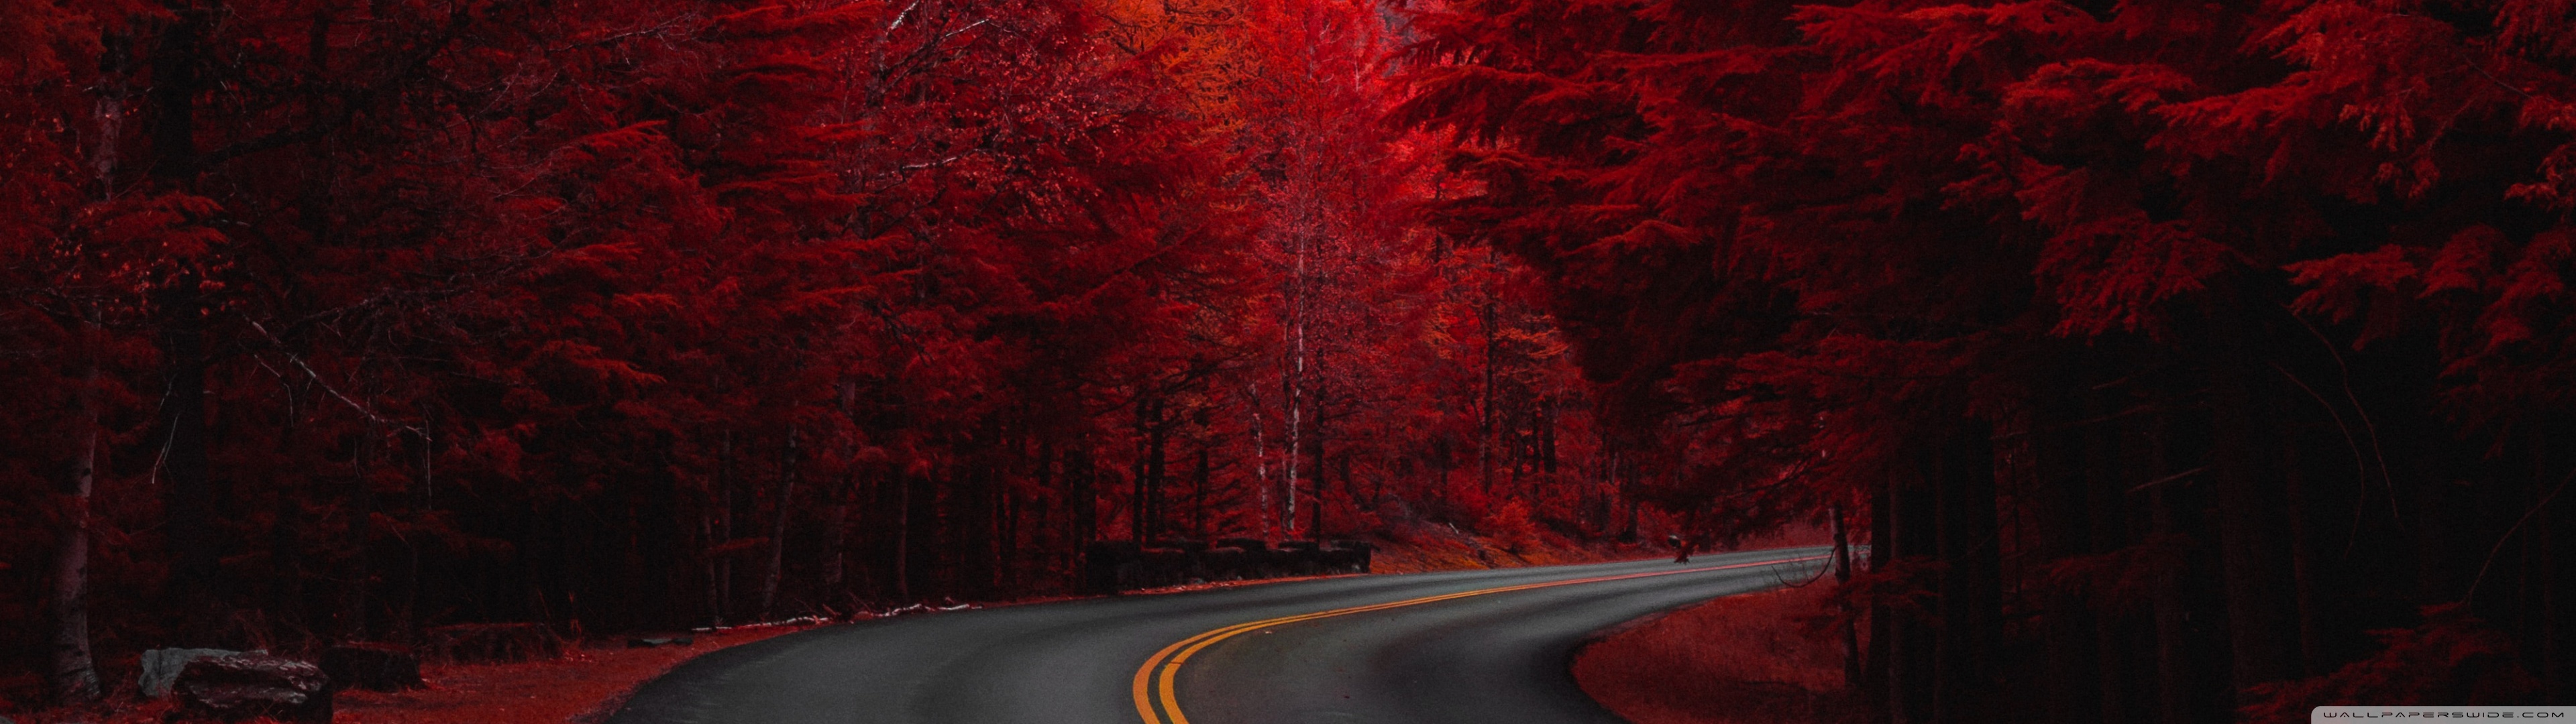 Autumn, Road, Aesthetic Ultra HD Desktop Background Wallpaper for: Multi Display, Dual Monitor, Tablet